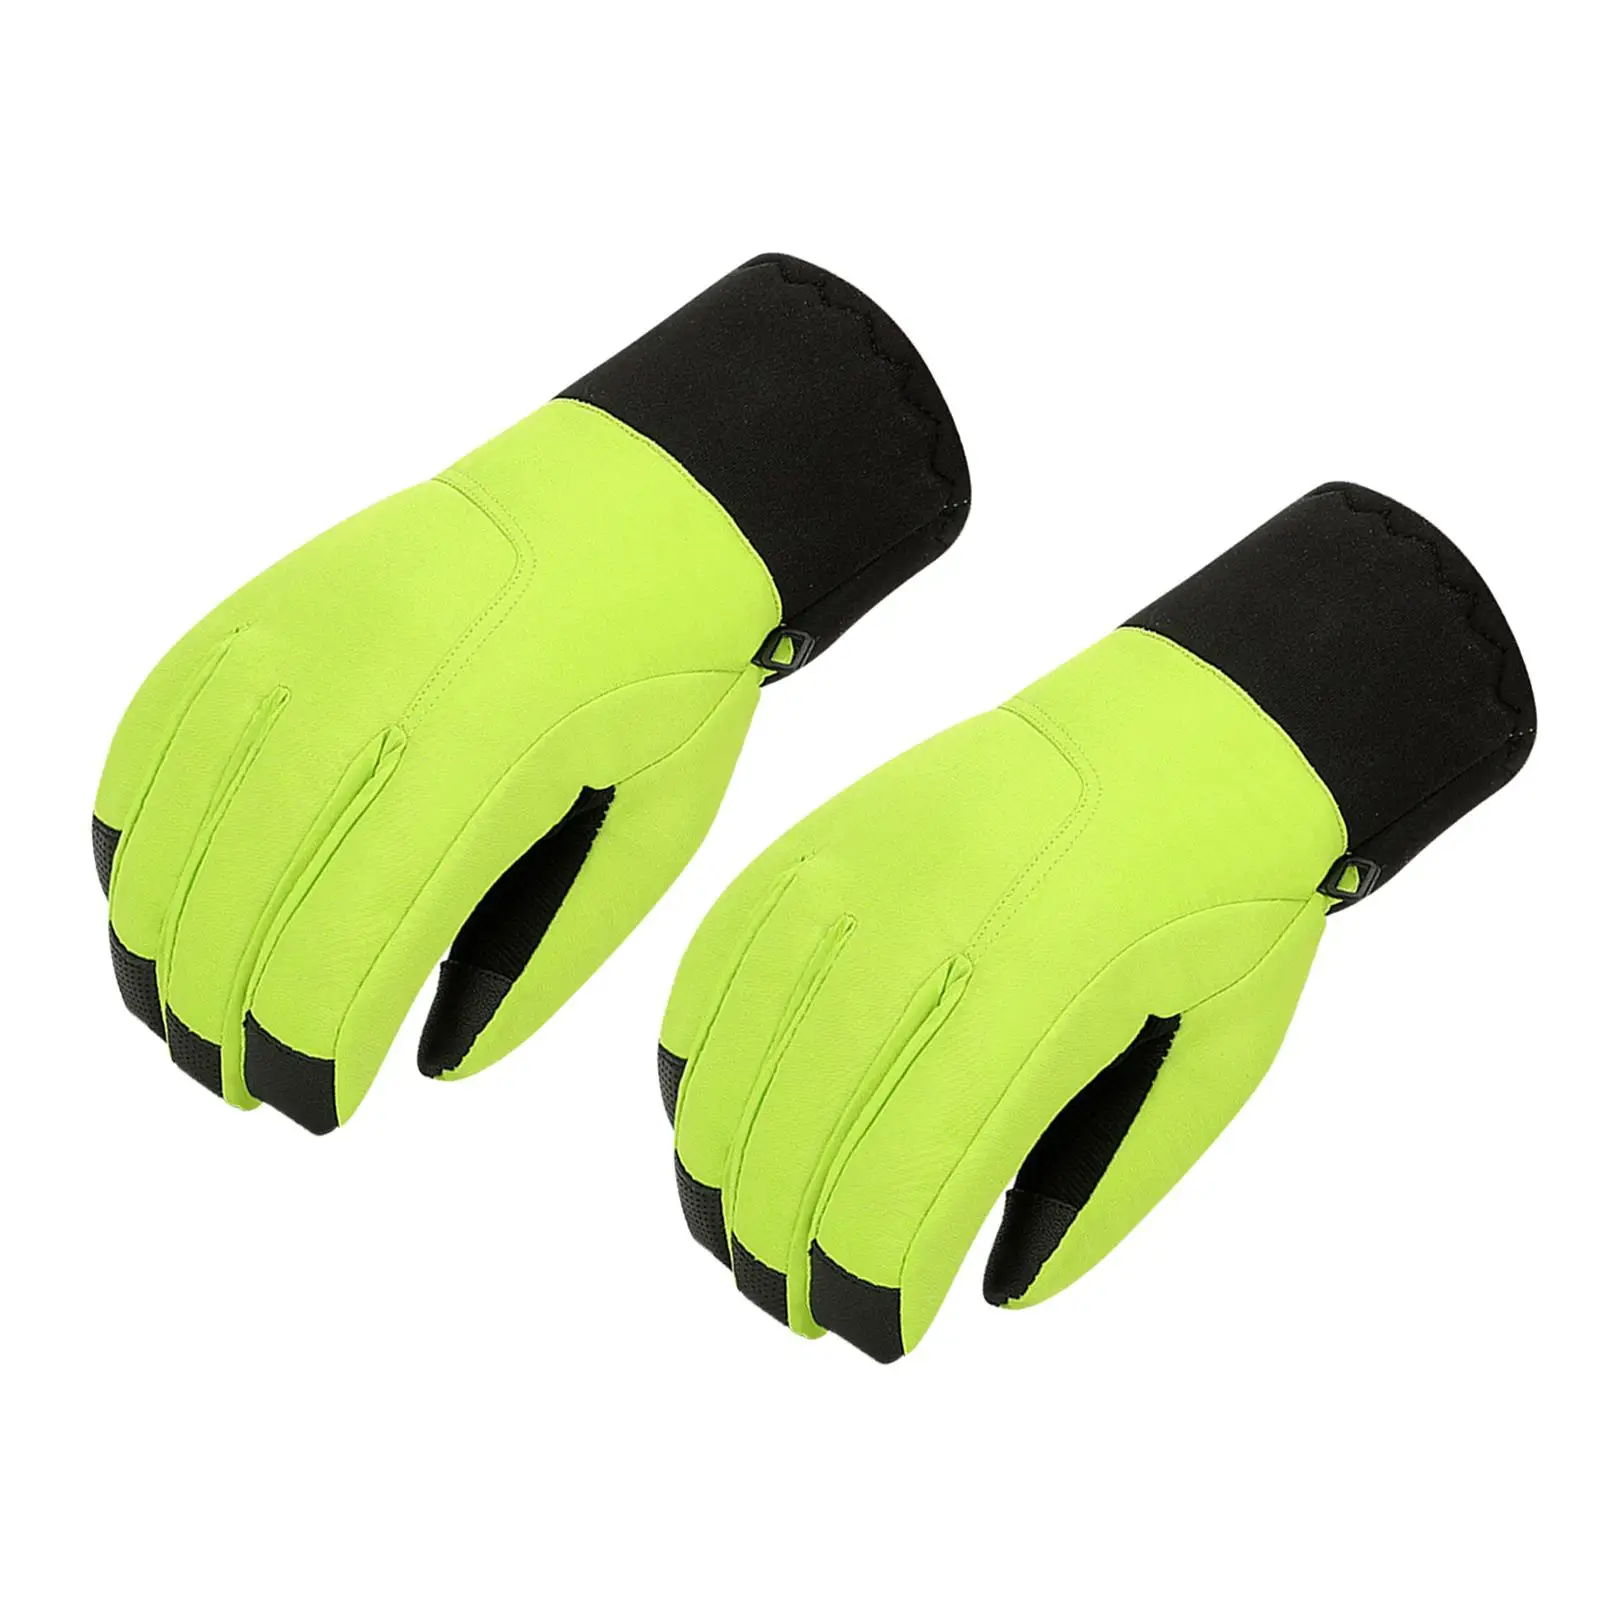 Winter Gloves Windproof Touchscreen Waterproof Thermal Insulation Breathable Comfortable Full Finger Ski Gloves for Kids